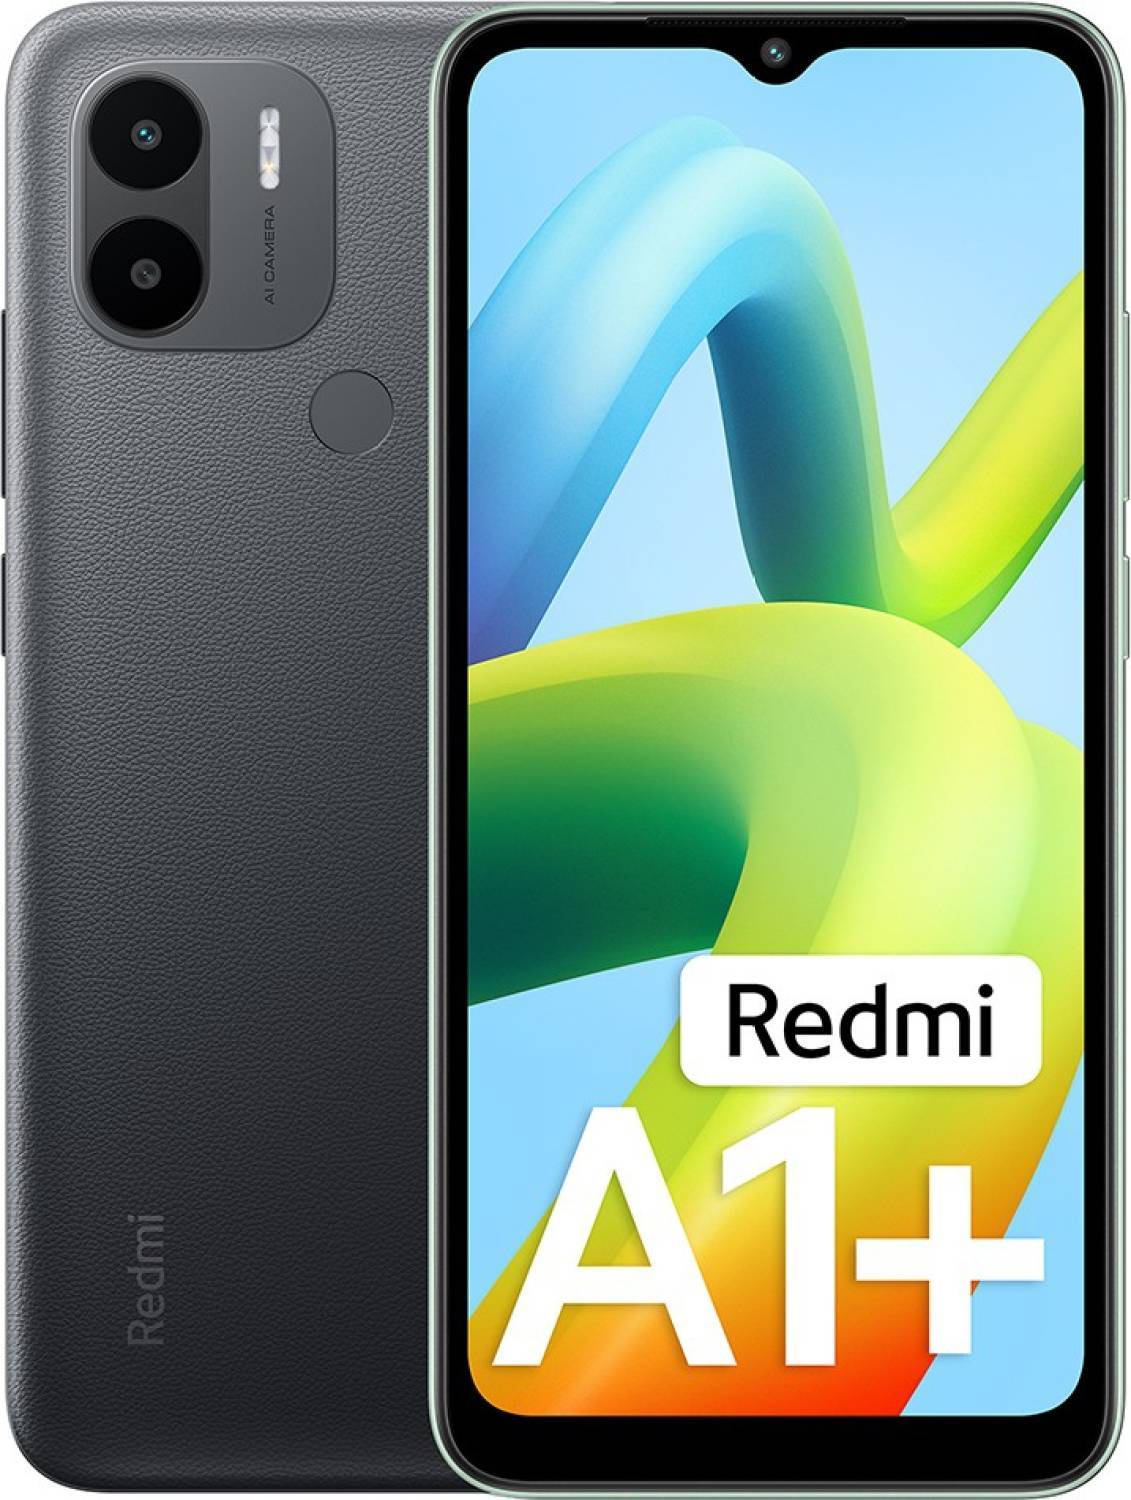 Redmi A1+ Android smartphone launched in India at Rs 6,999: Details here -  BusinessToday